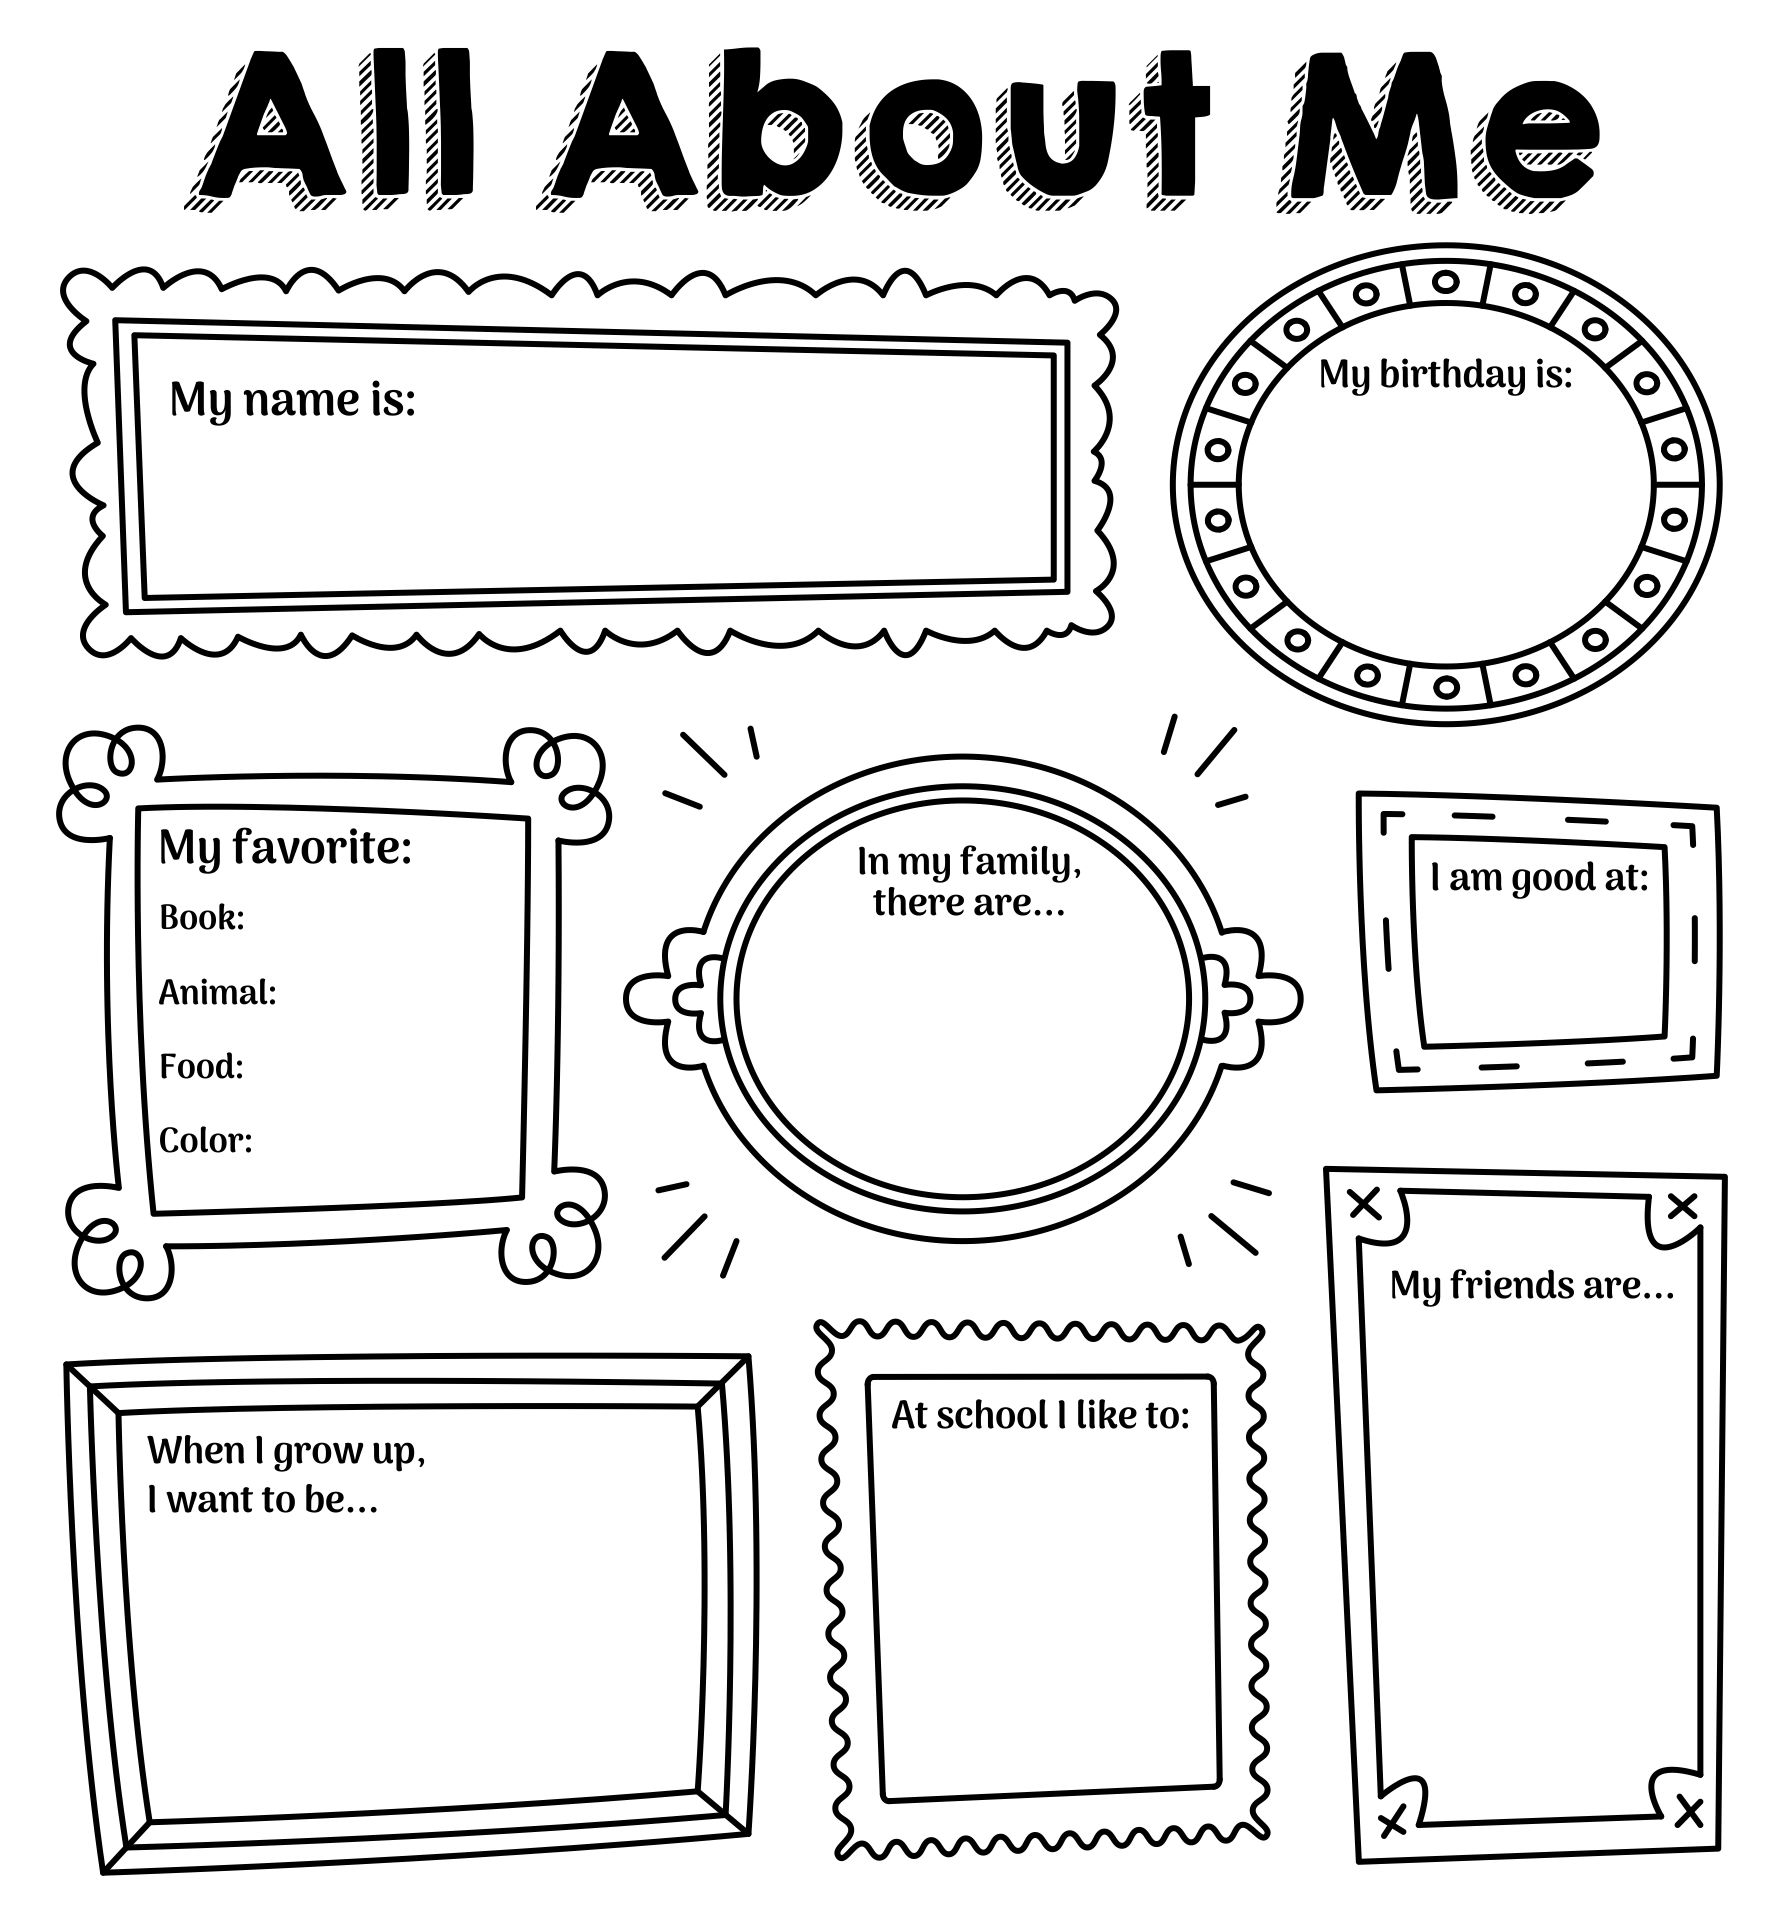 All About Me Profile Printable